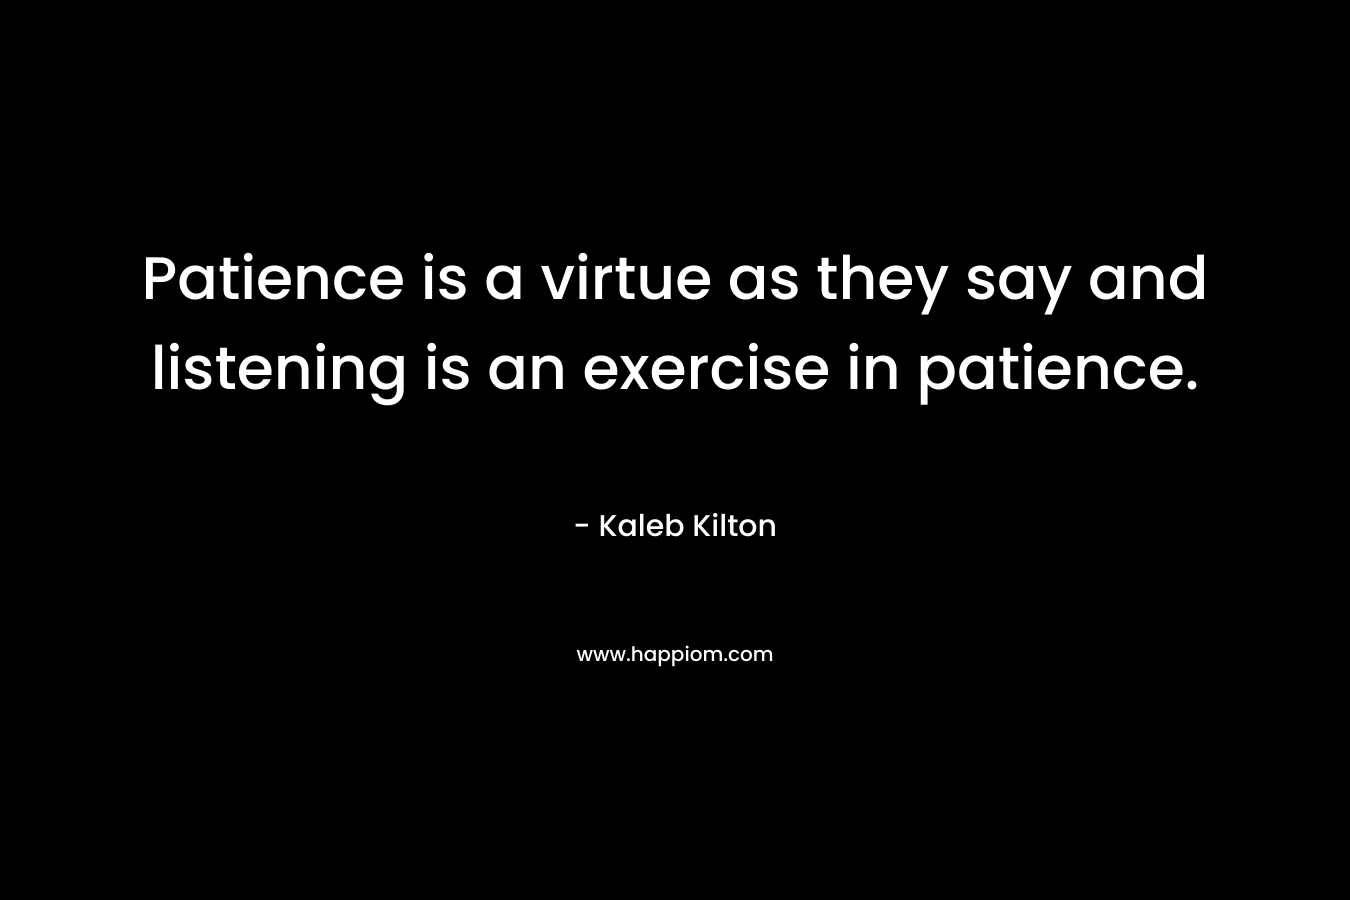 Patience is a virtue as they say and listening is an exercise in patience. – Kaleb Kilton